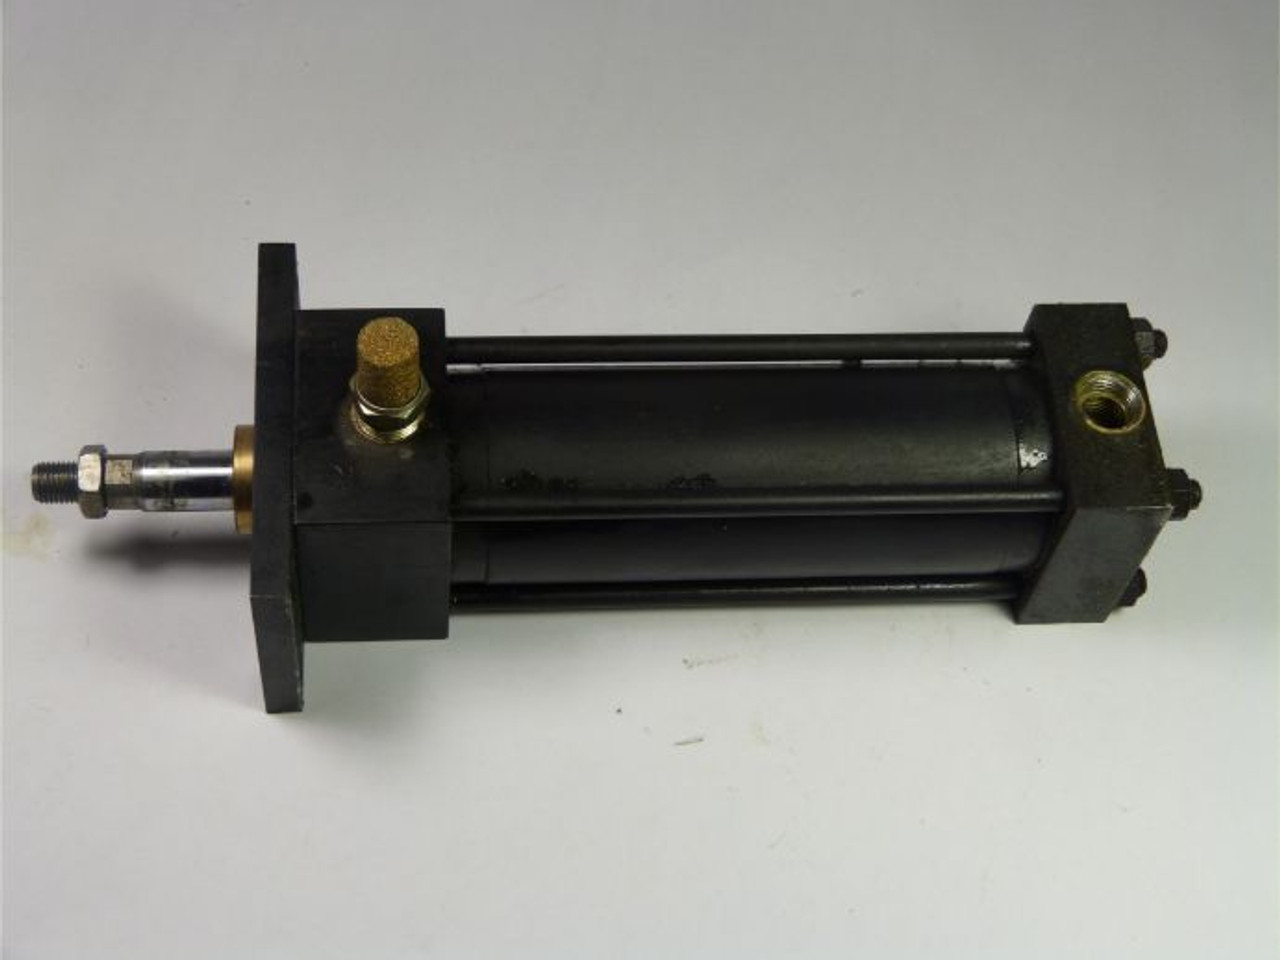 Schrader PAB102121 Double Acting Pneumatic Cylinder 8.375" USED